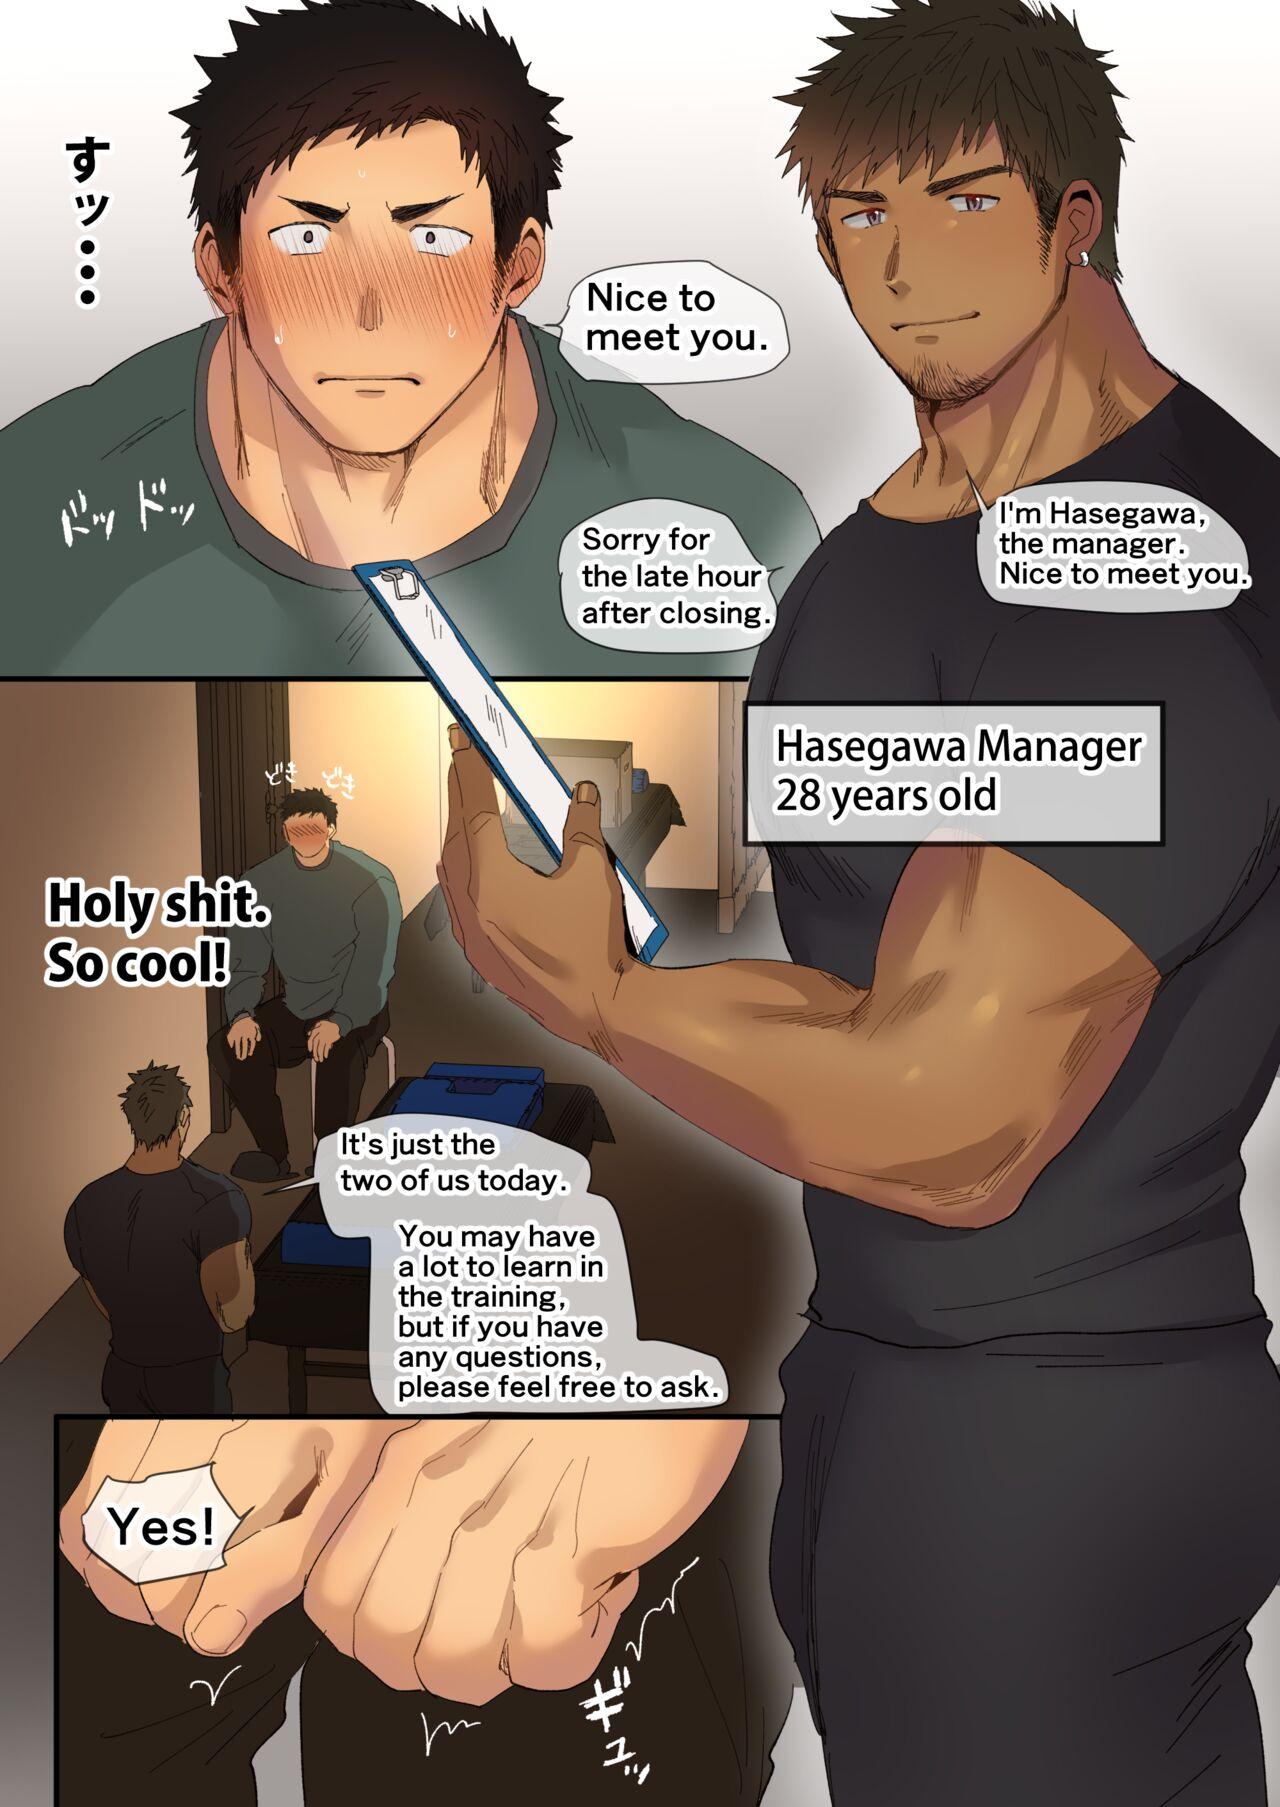 Lesbian Porn A manga about an athletic college student who receives sexually explicit massage training from an older manager - Original Missionary Porn - Page 2